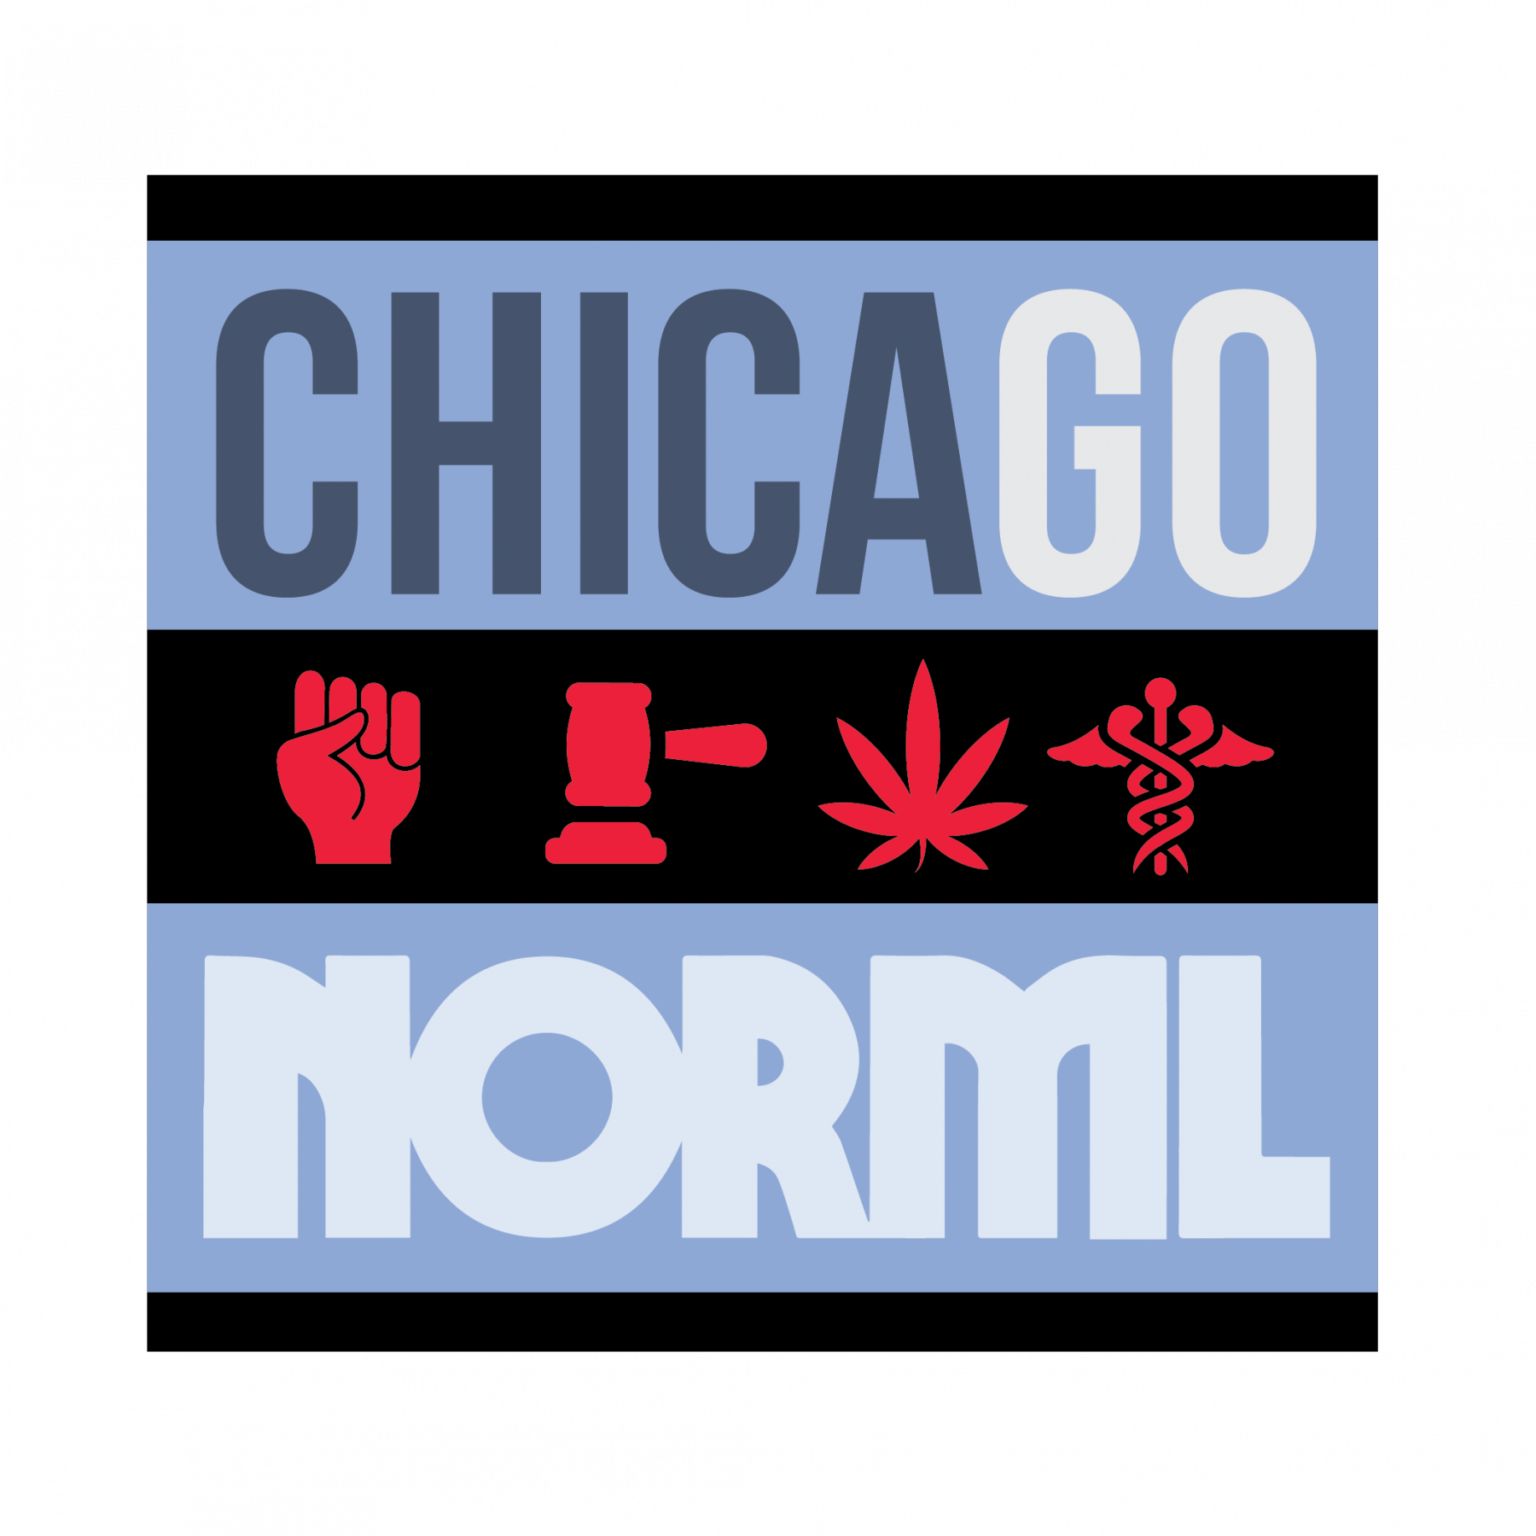 Chicago NORML is exhibiting at CannaCon!